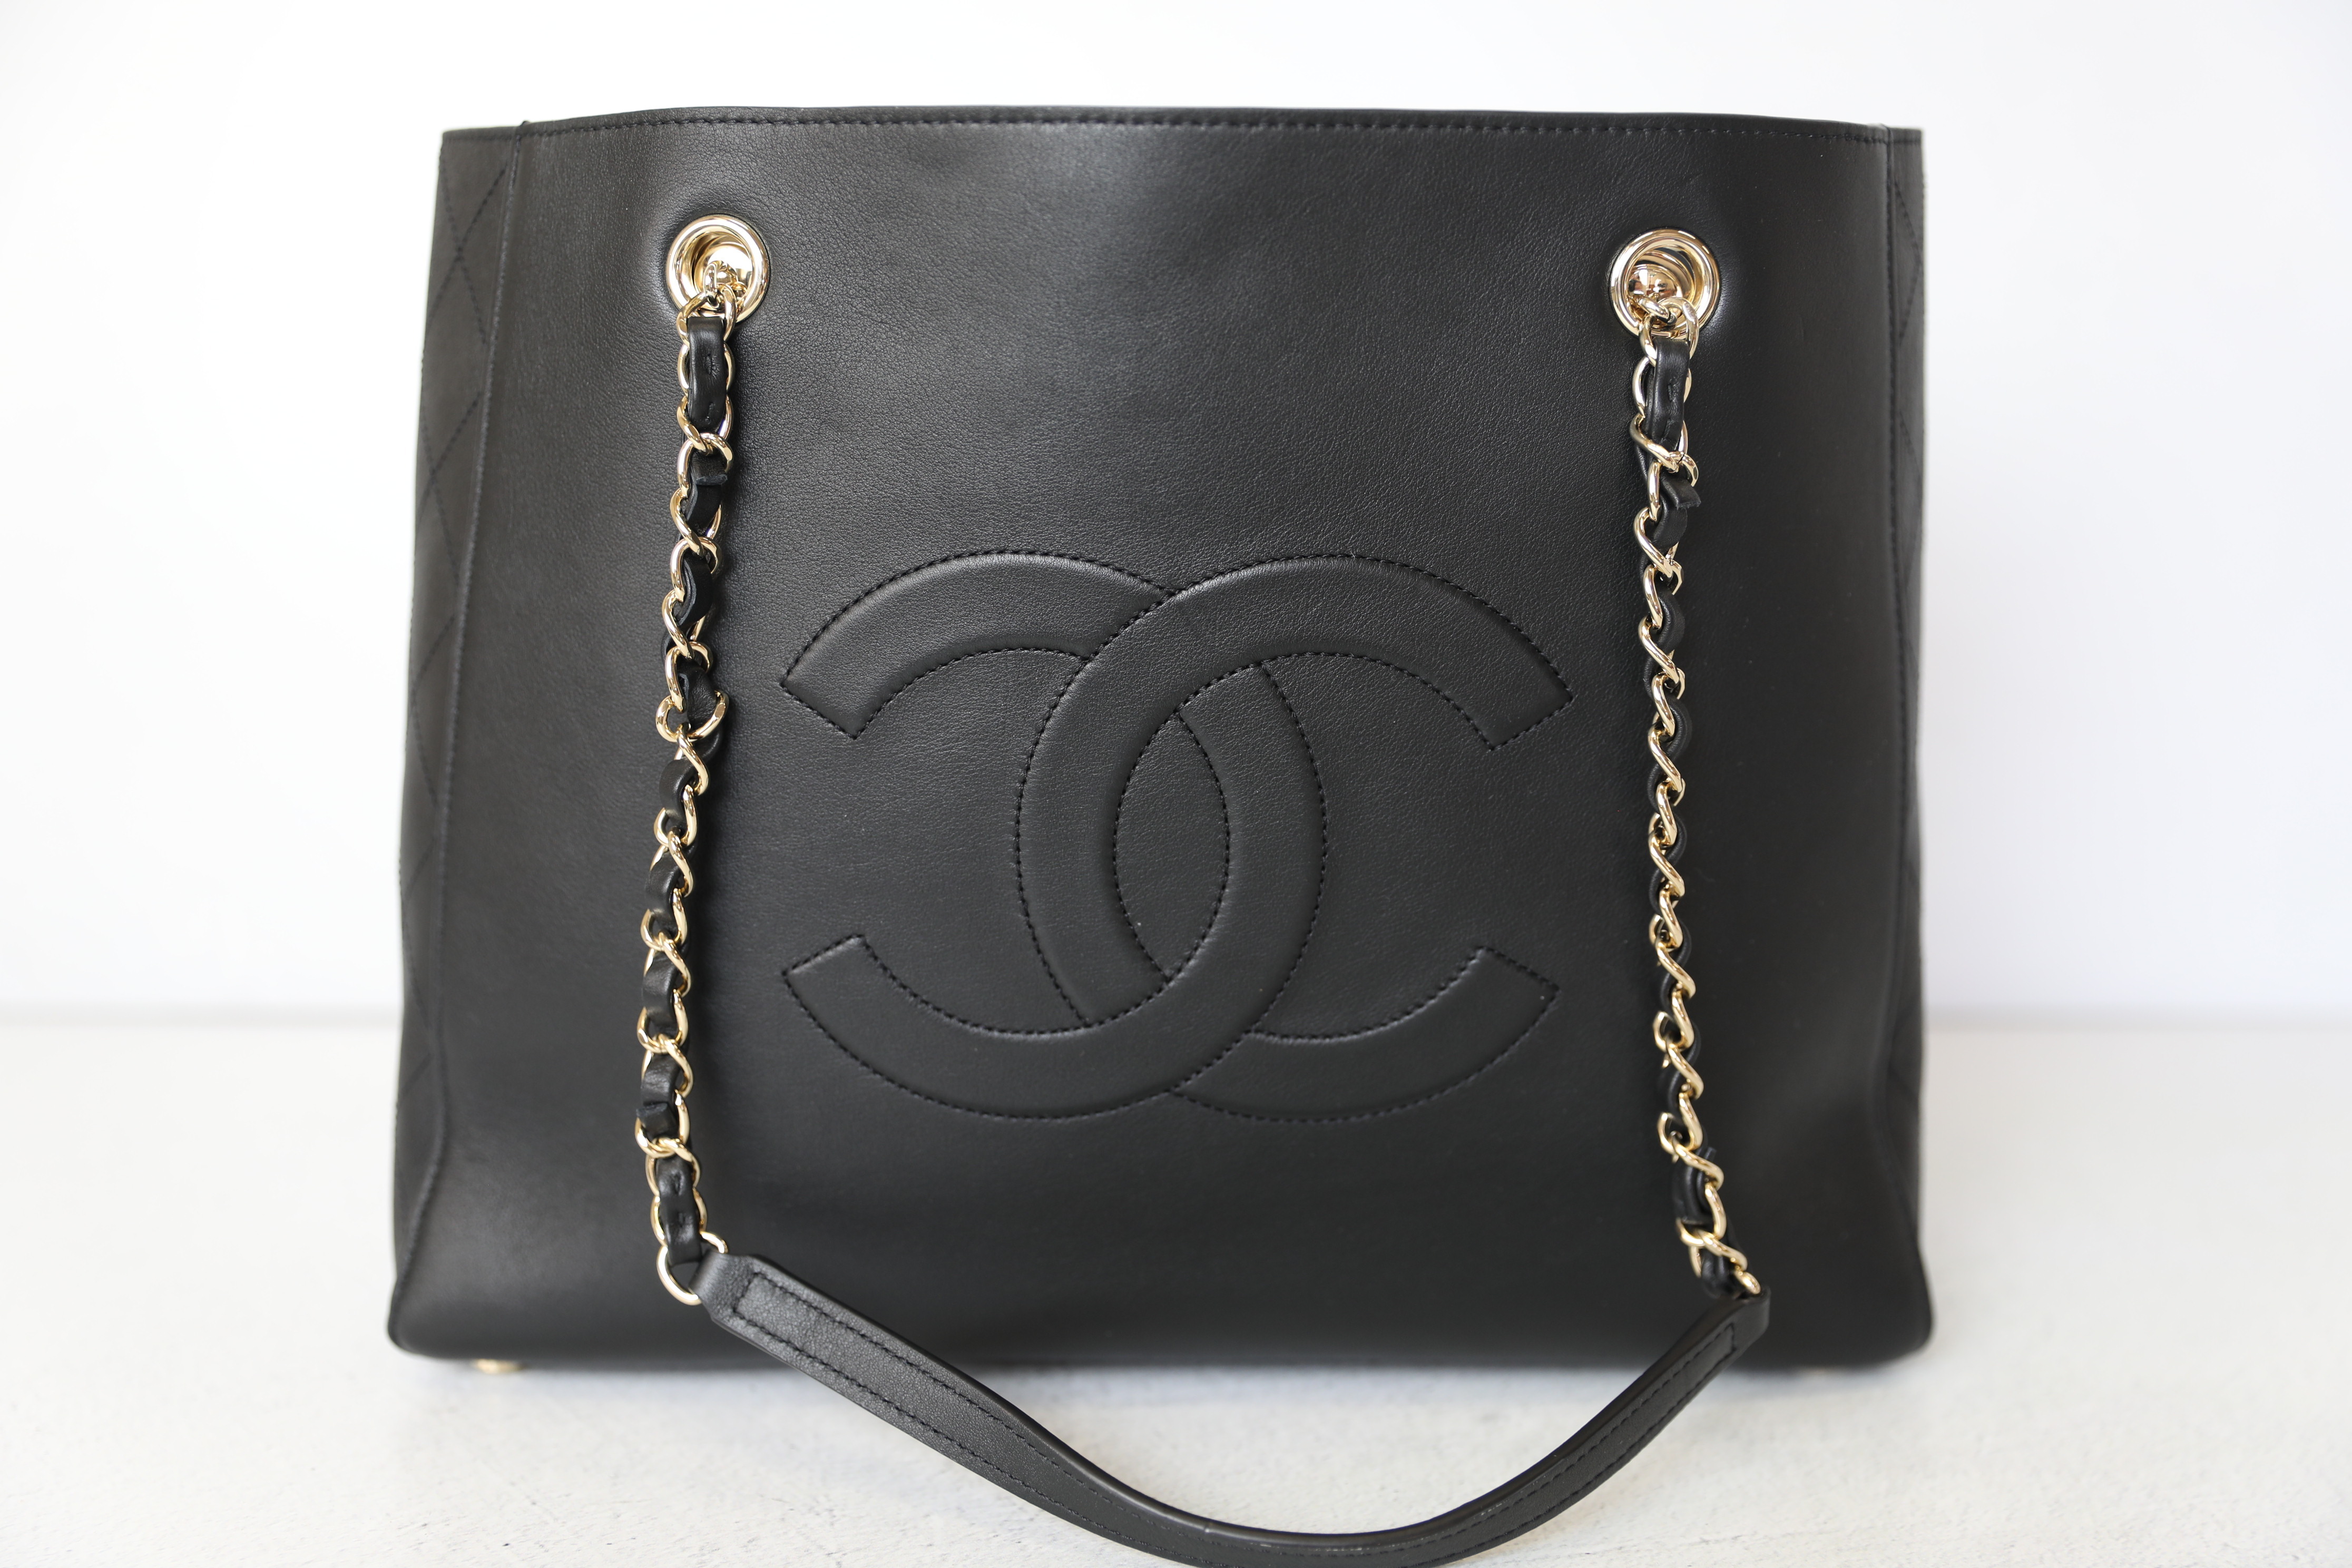 Chanel Shopping Tote, Black Leather with Gold Hardware, Preowned in Dustbag  WA001 - Julia Rose Boston